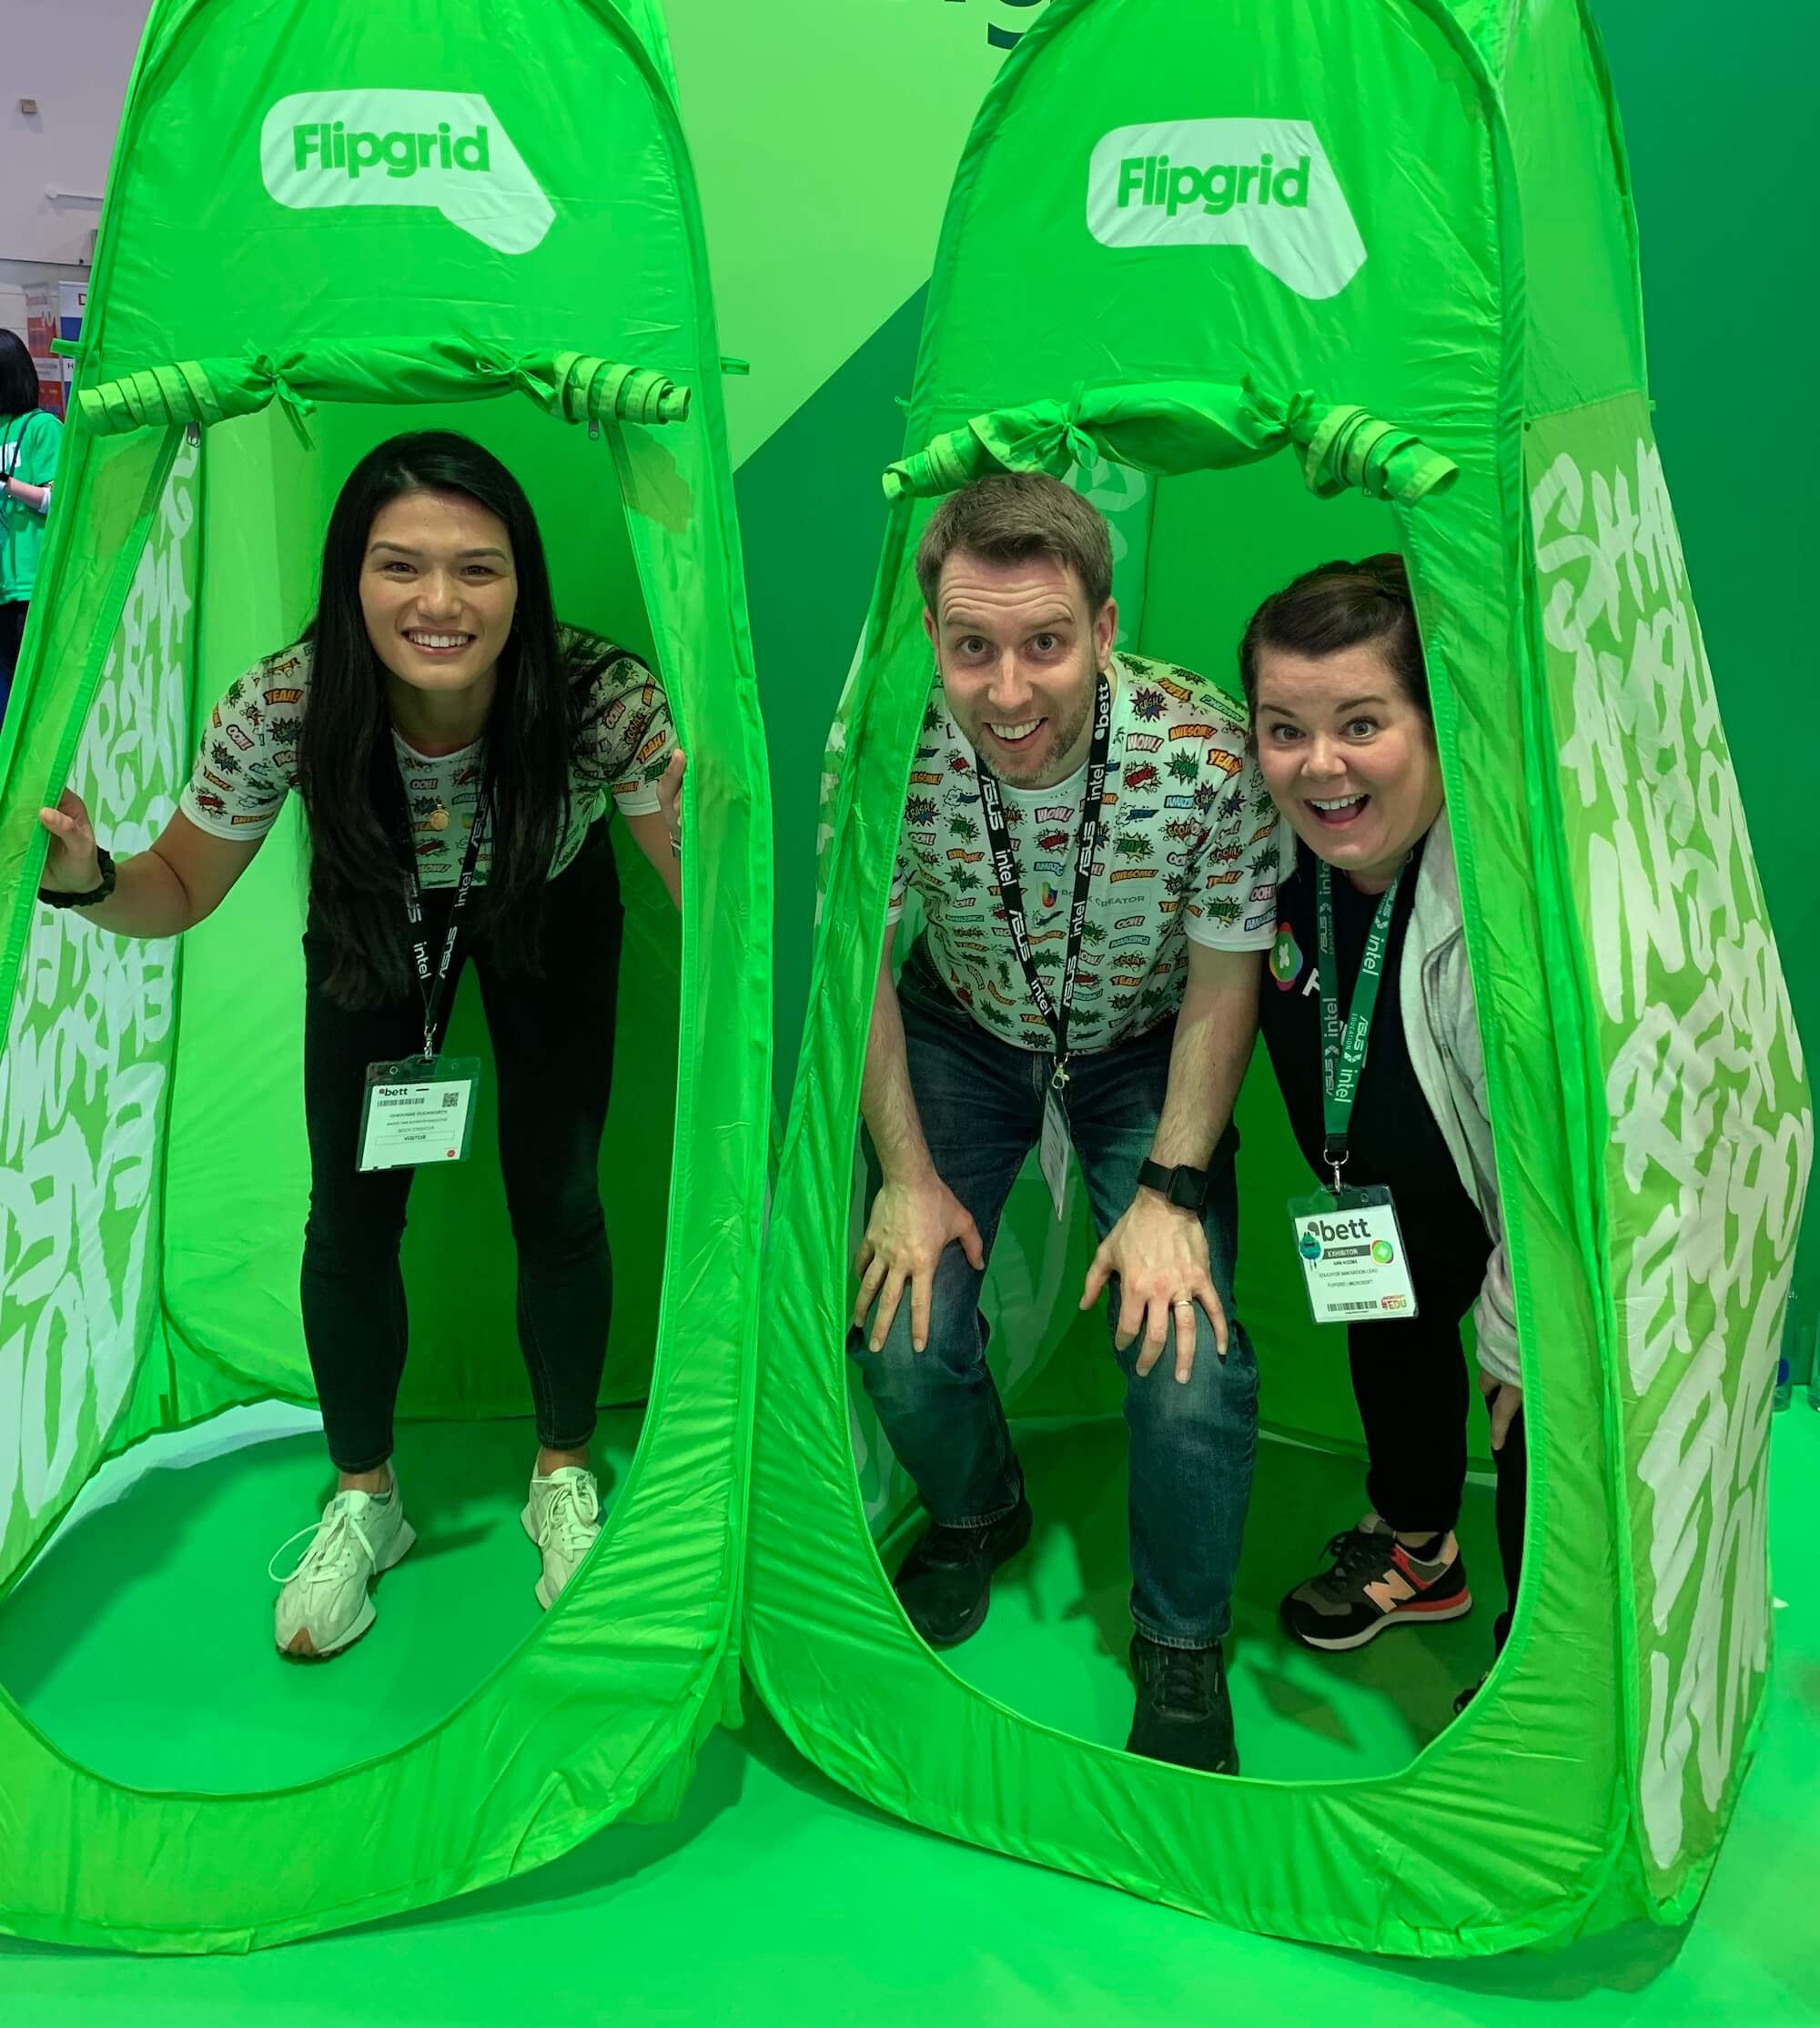 Three people are posing inside bright green pop-up tents with the Flipgrid logo at the top. From left to right, there is a woman with long dark hair, a man with short hair, and a woman with shoulder-length hair. They are all smiling and leaning forward, looking through the openings of the tents. They are wearing badges around their necks, indicating they are at a conference or event. The background is filled with a green color that matches the tents, creating a cohesive and lively atmosphere.